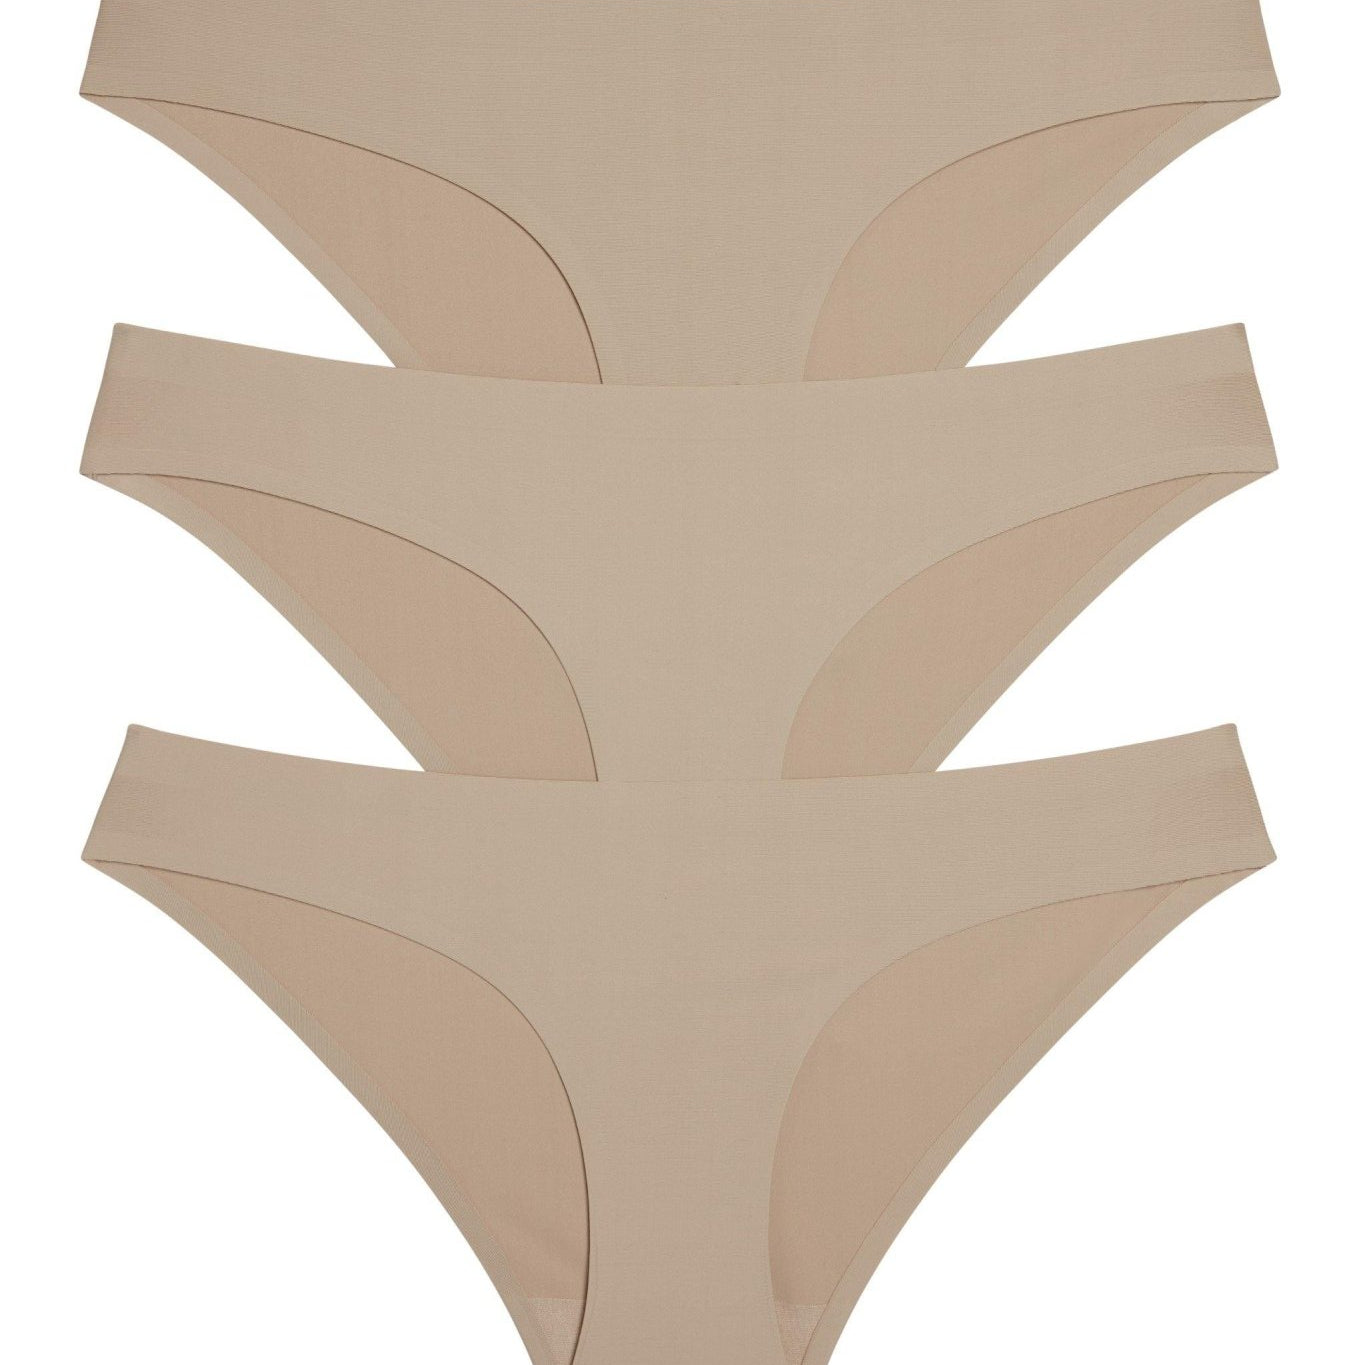 Skinz Hipster 3-Pack - Panty - Nude Nude